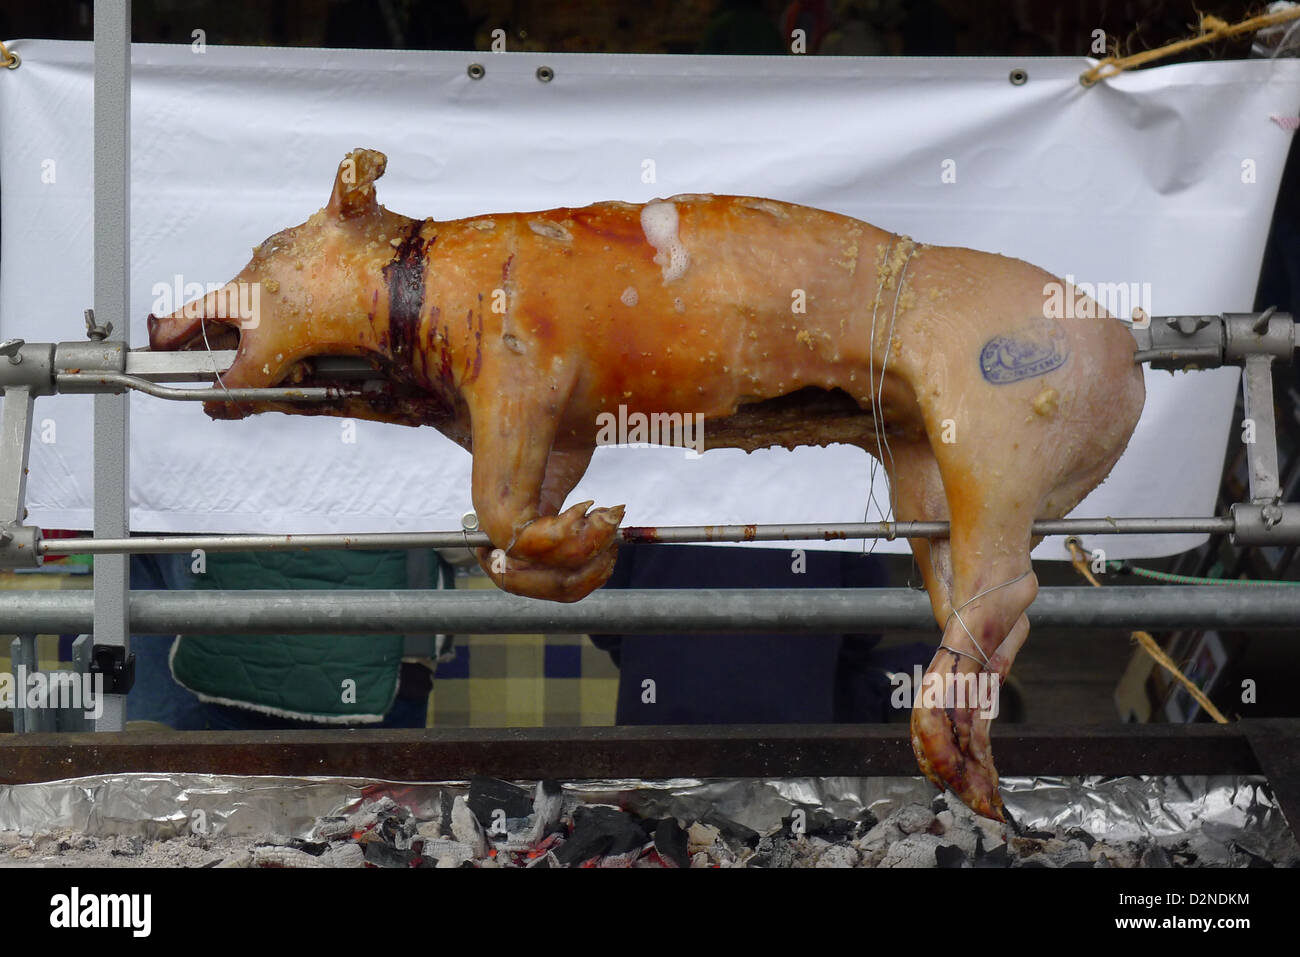 A young suckling pig being roasted on a rotating spit over hot coals at a BBQ Stock Photo